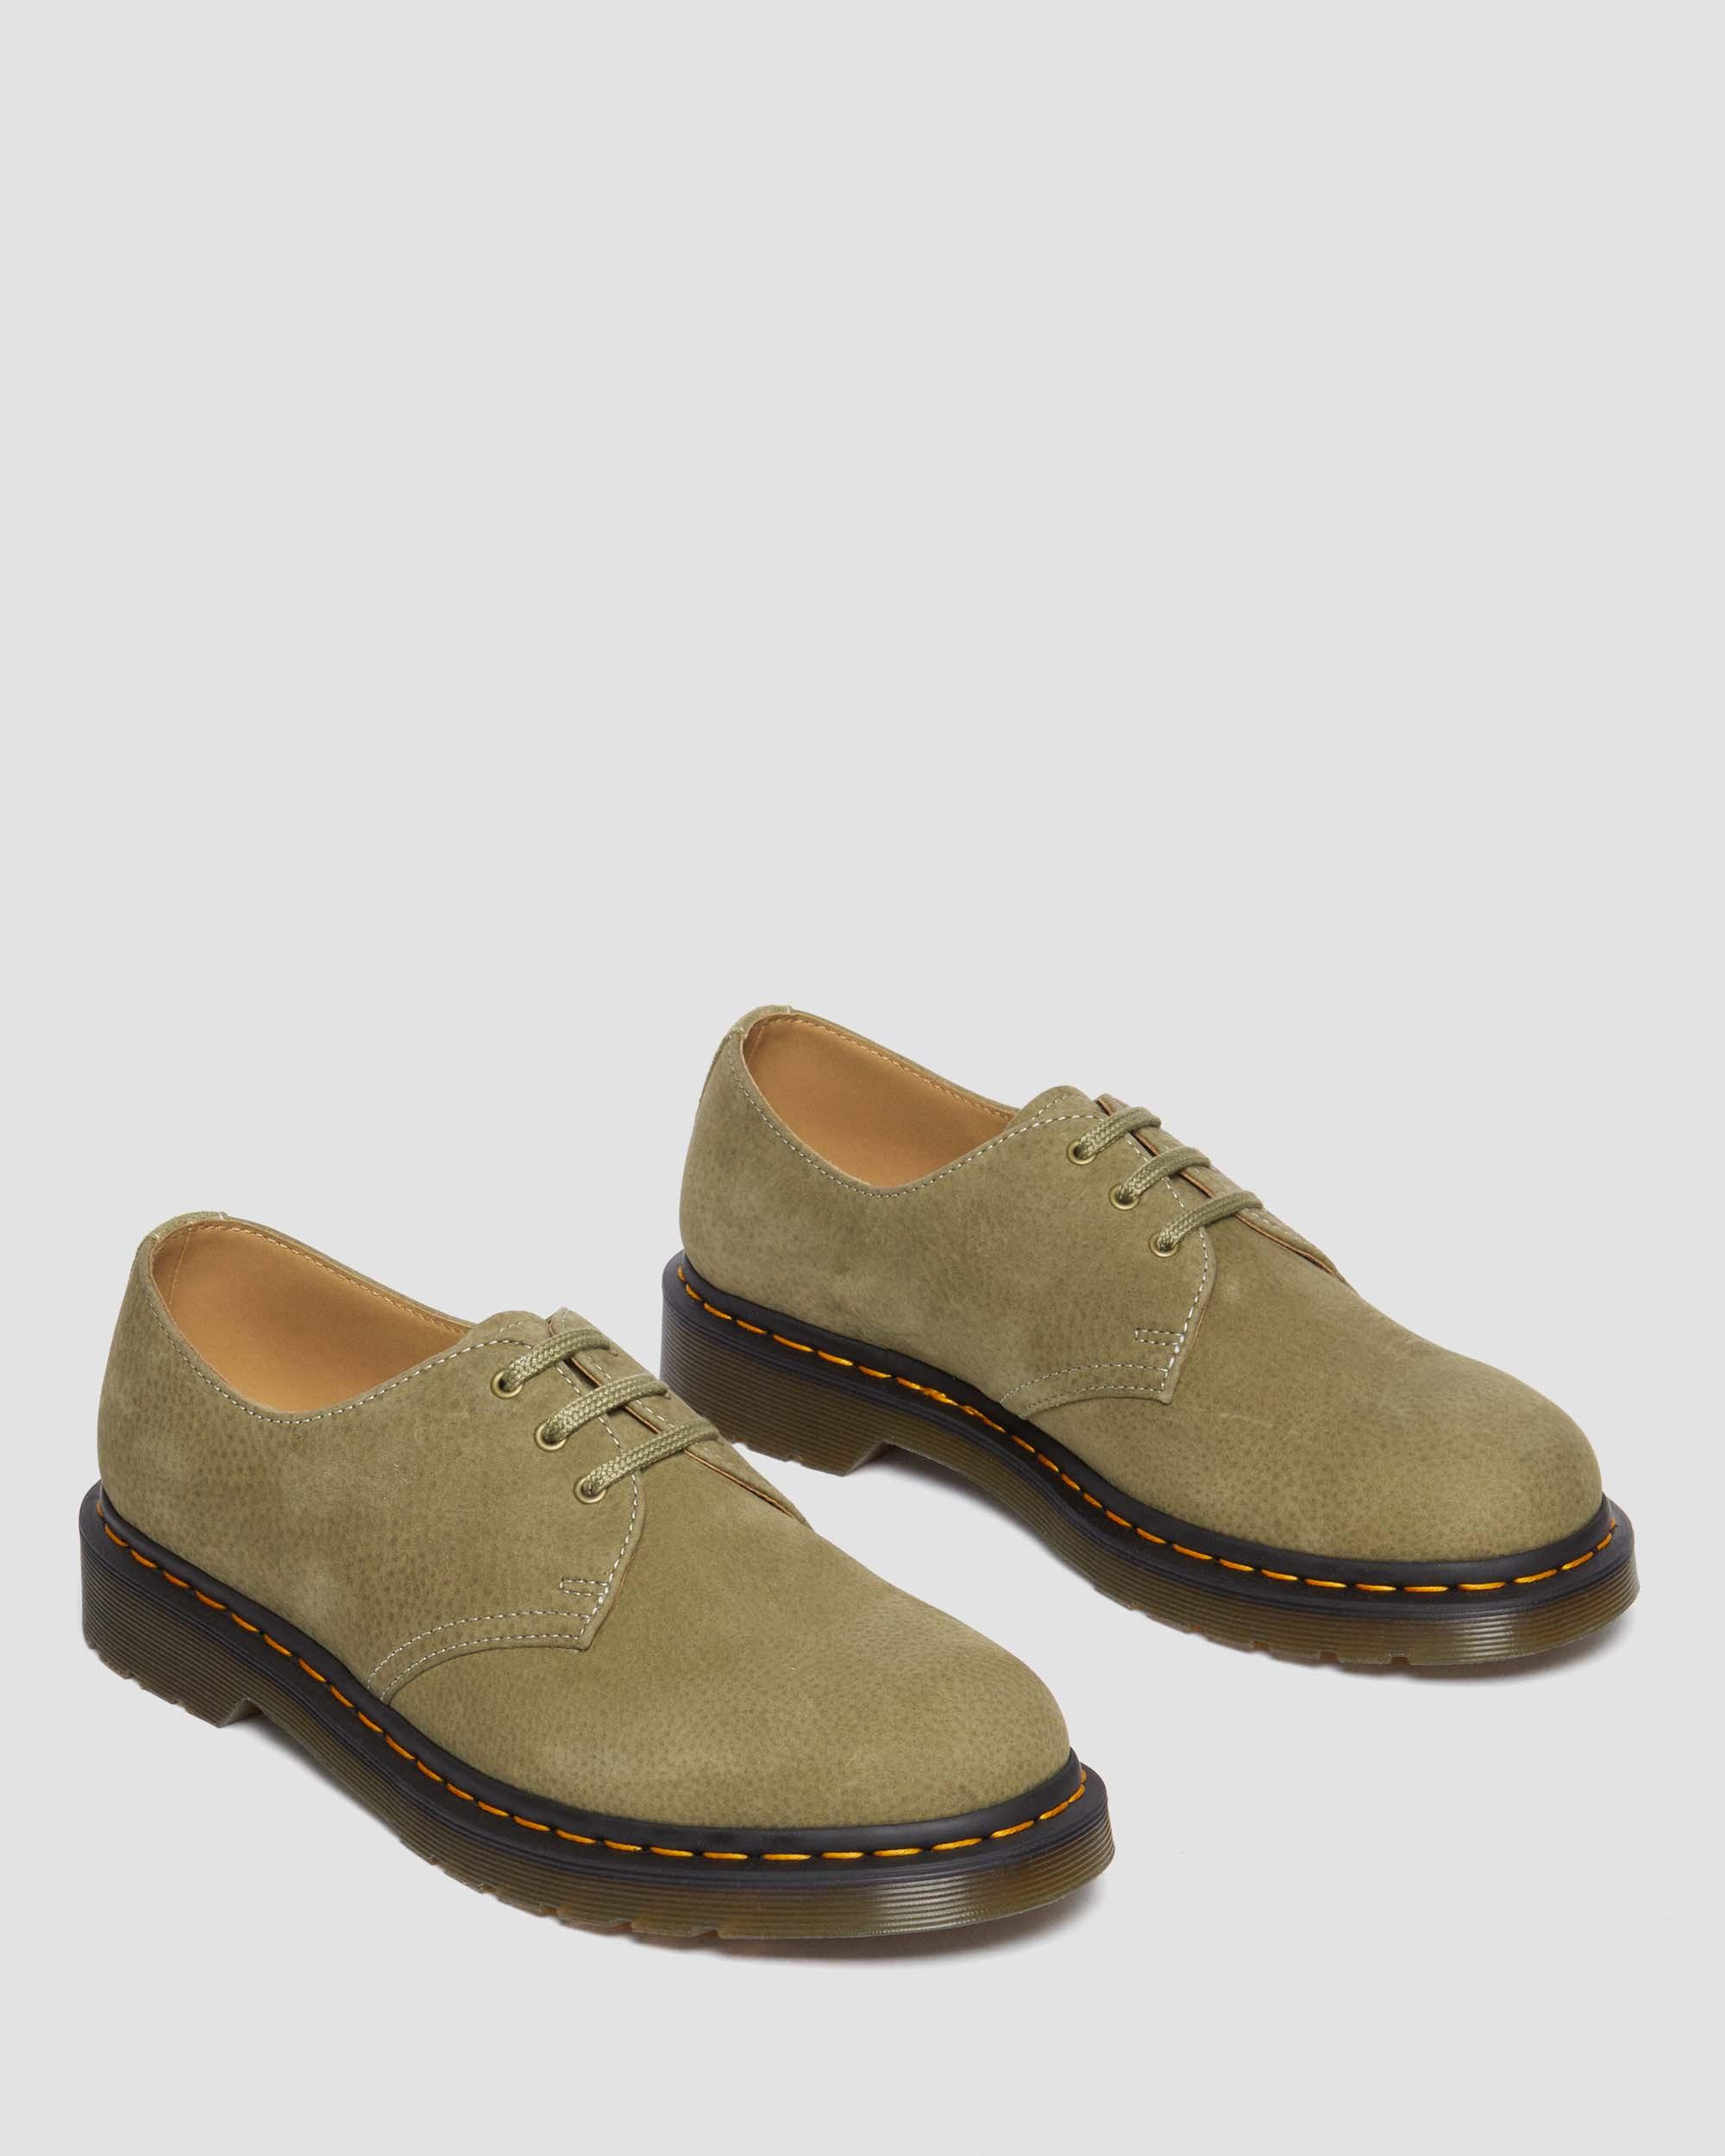 1461 Tumbled Nubuck Leather Oxford Shoes in Muted Olive